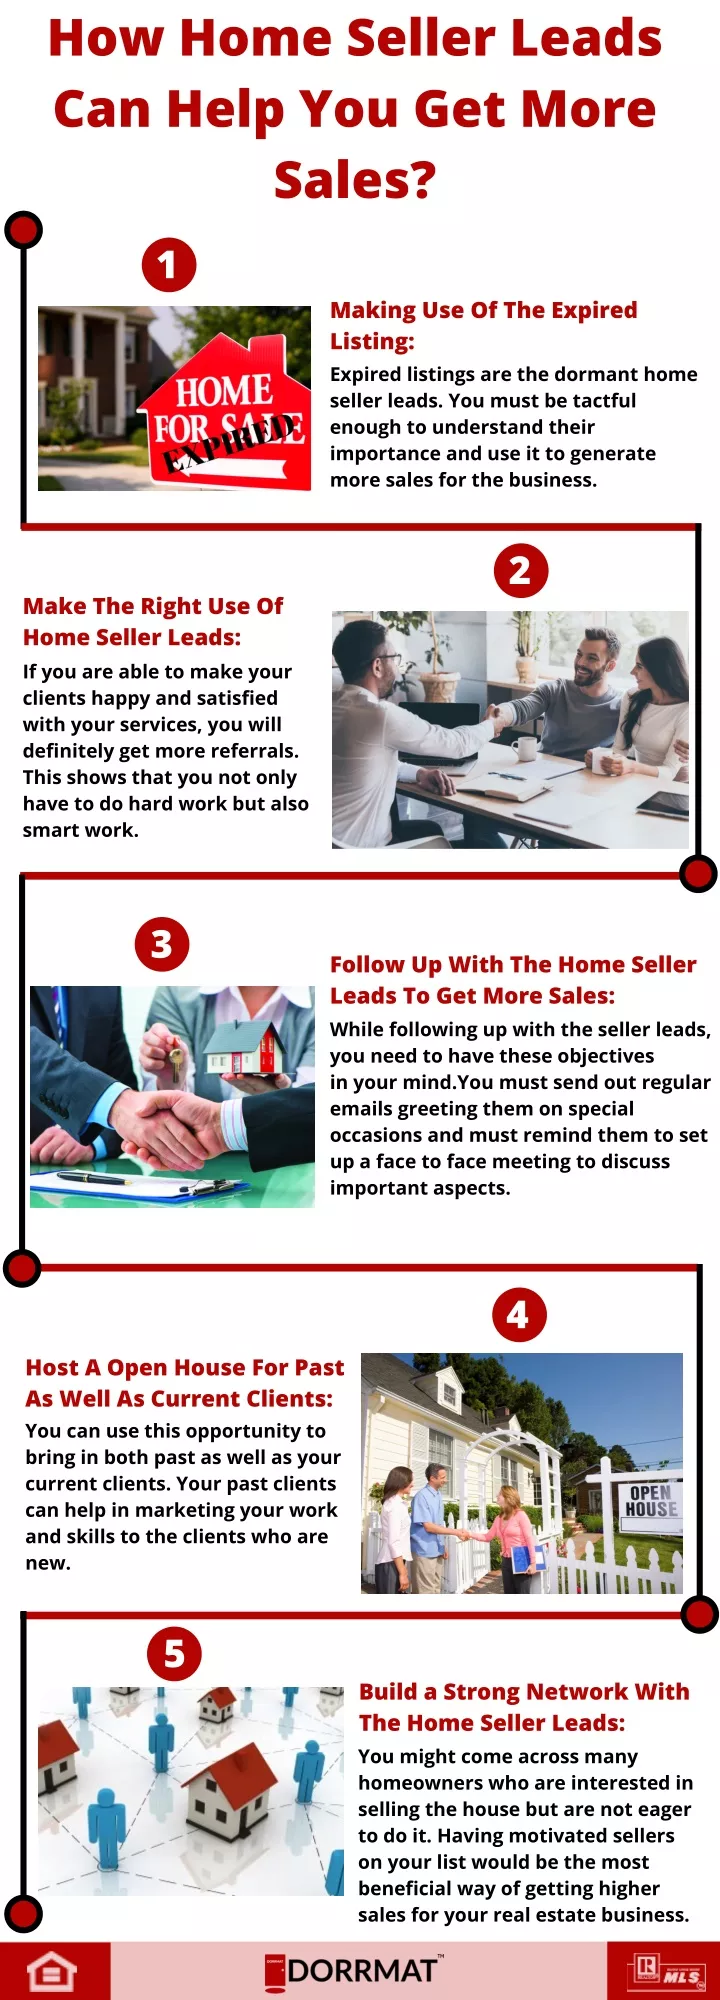 how home seller leads can help you get more sales